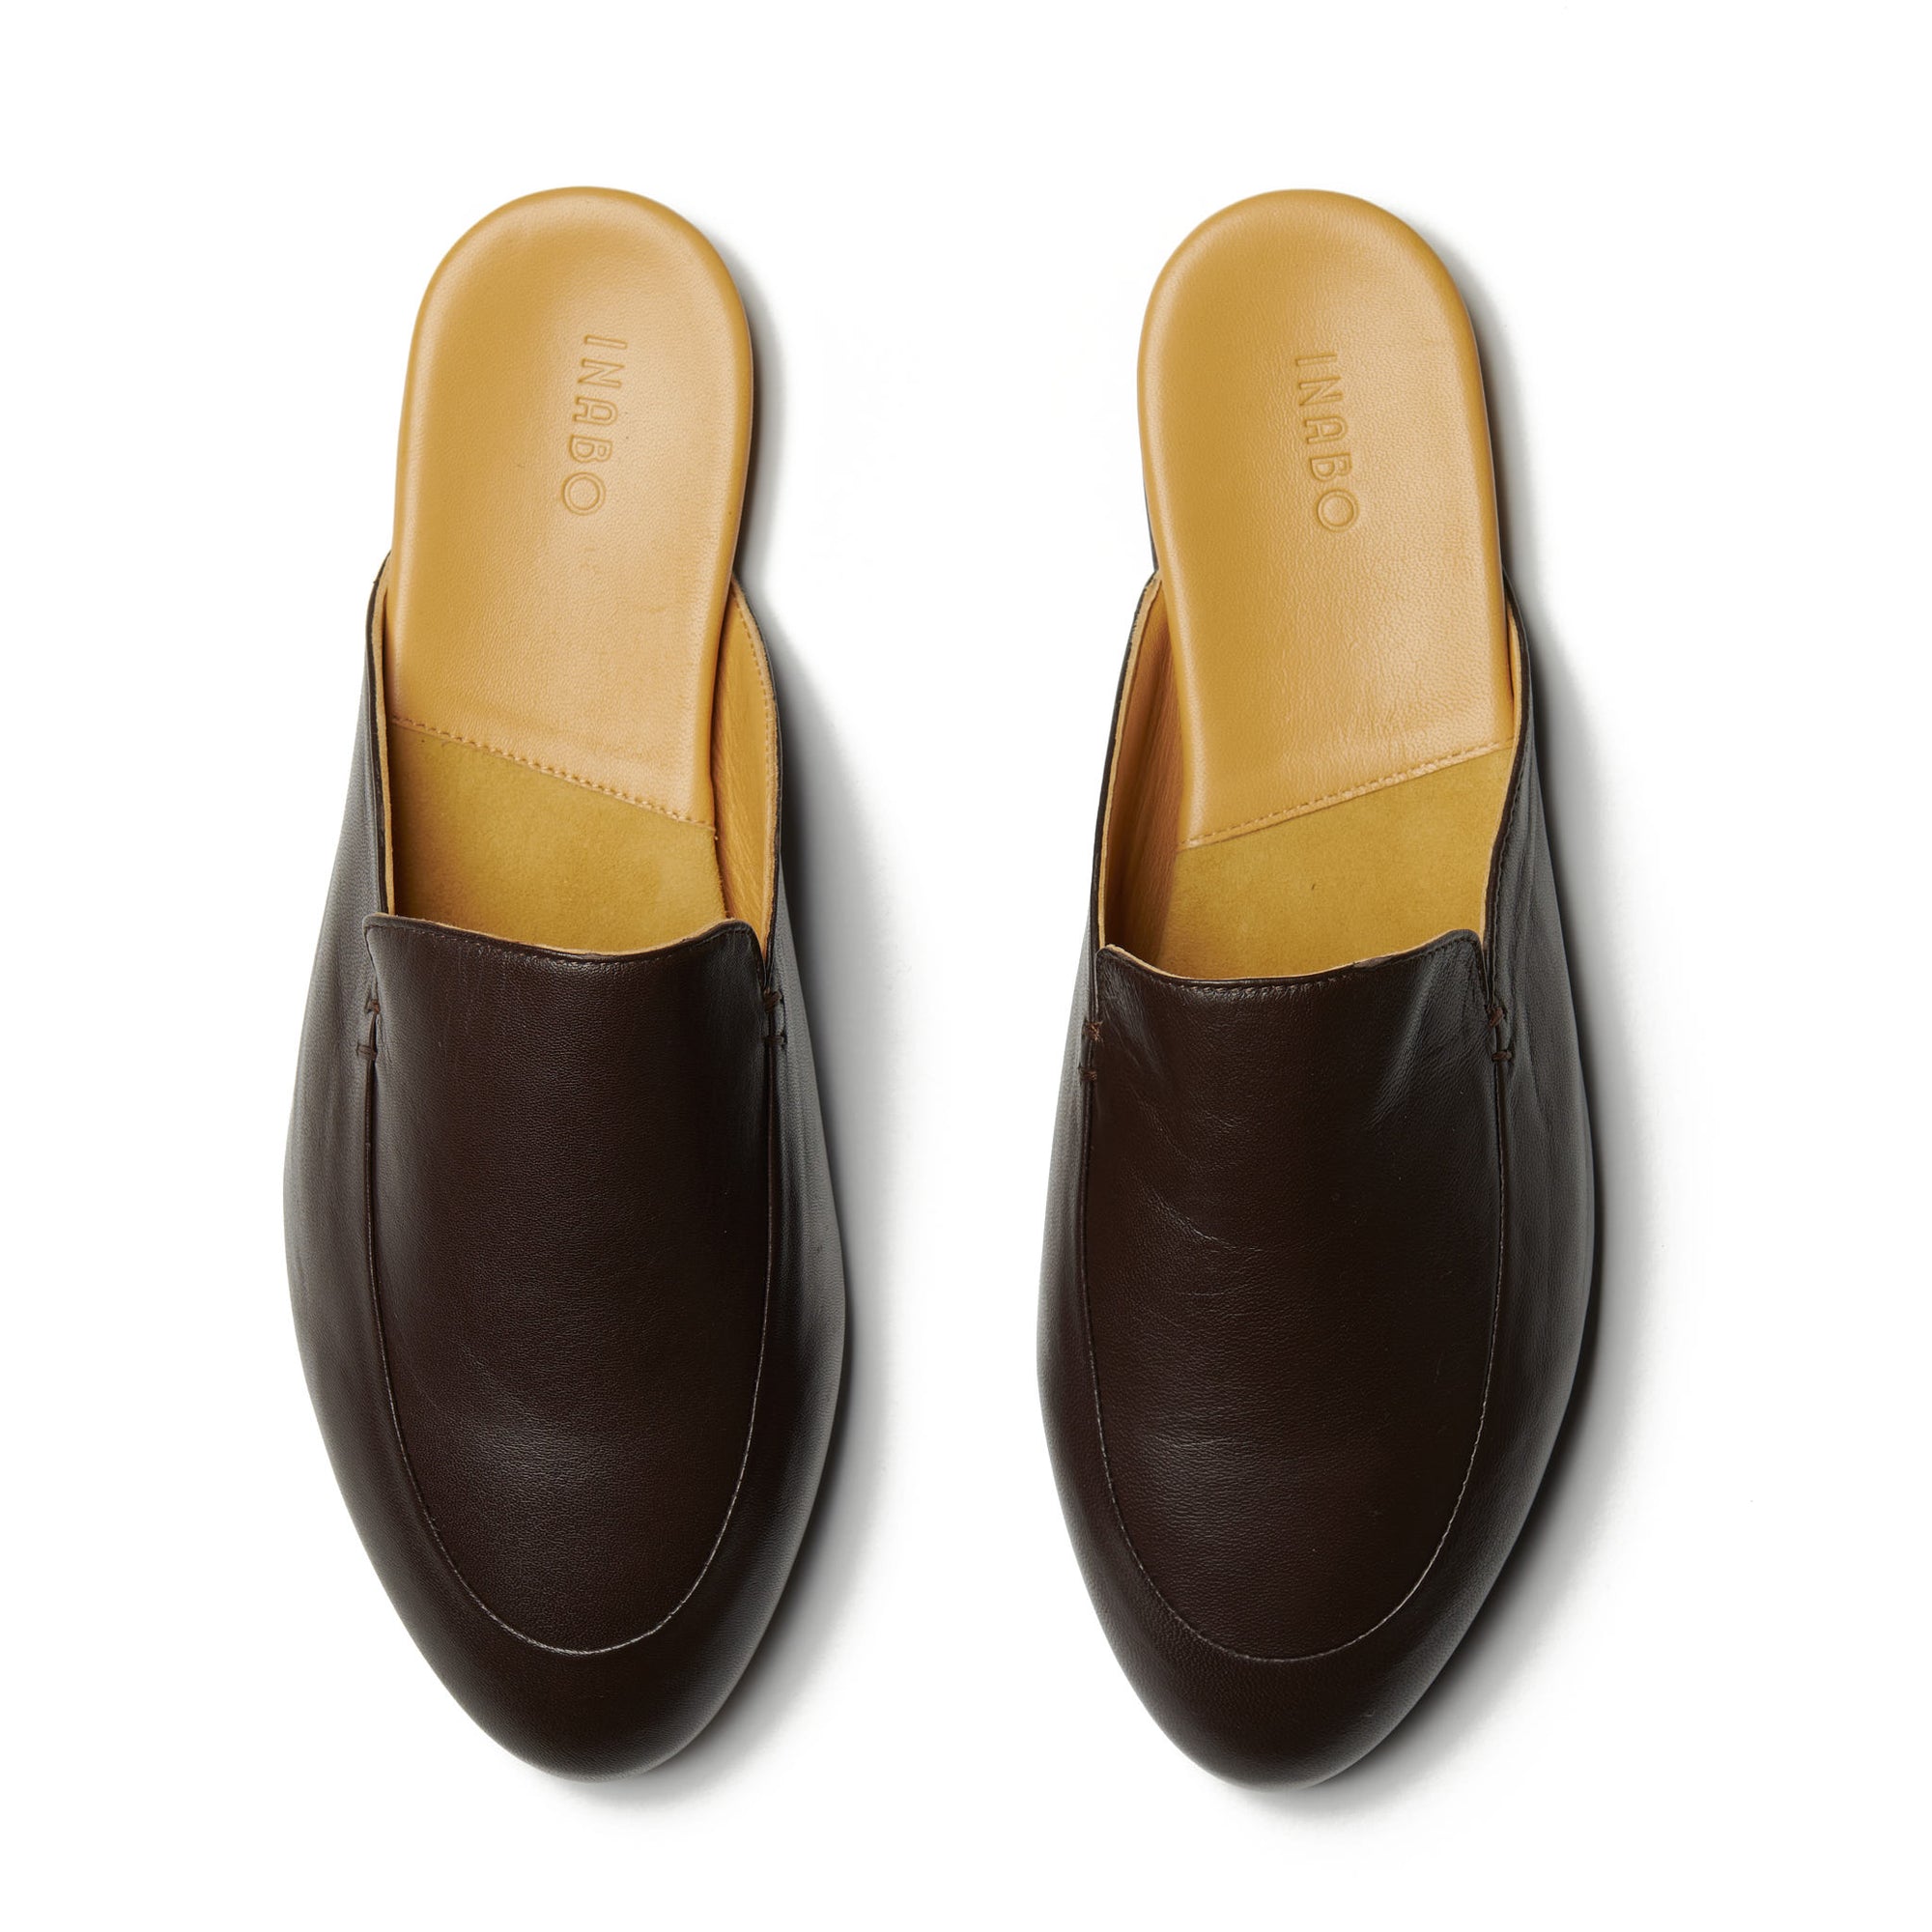 Men's Dark Brown Leather Slippers with Yellow insole